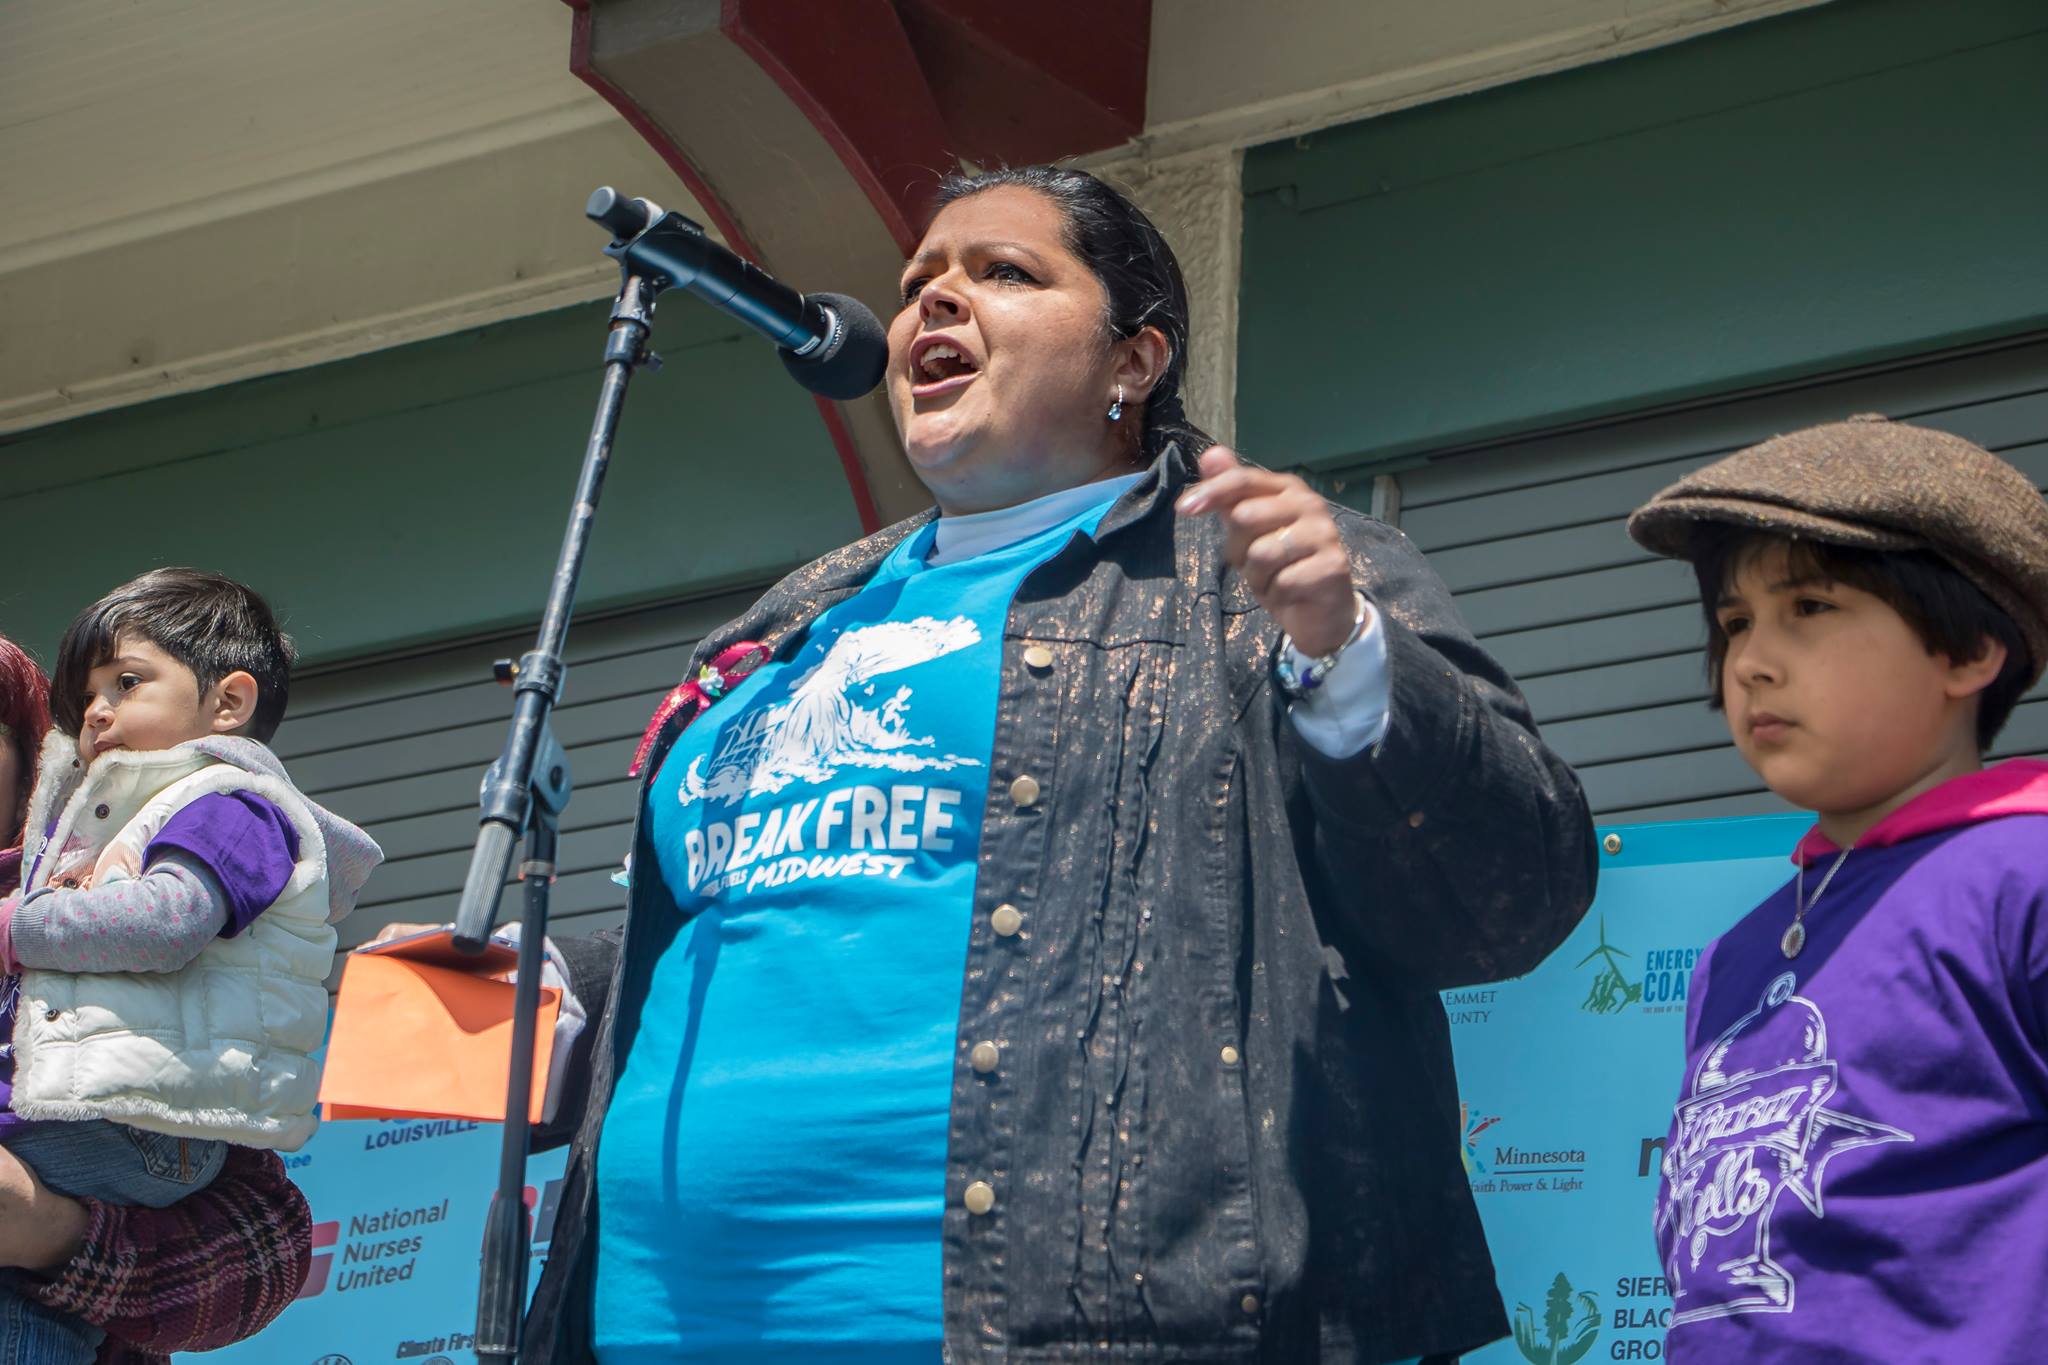 Woman speaking into a microphone at a rally